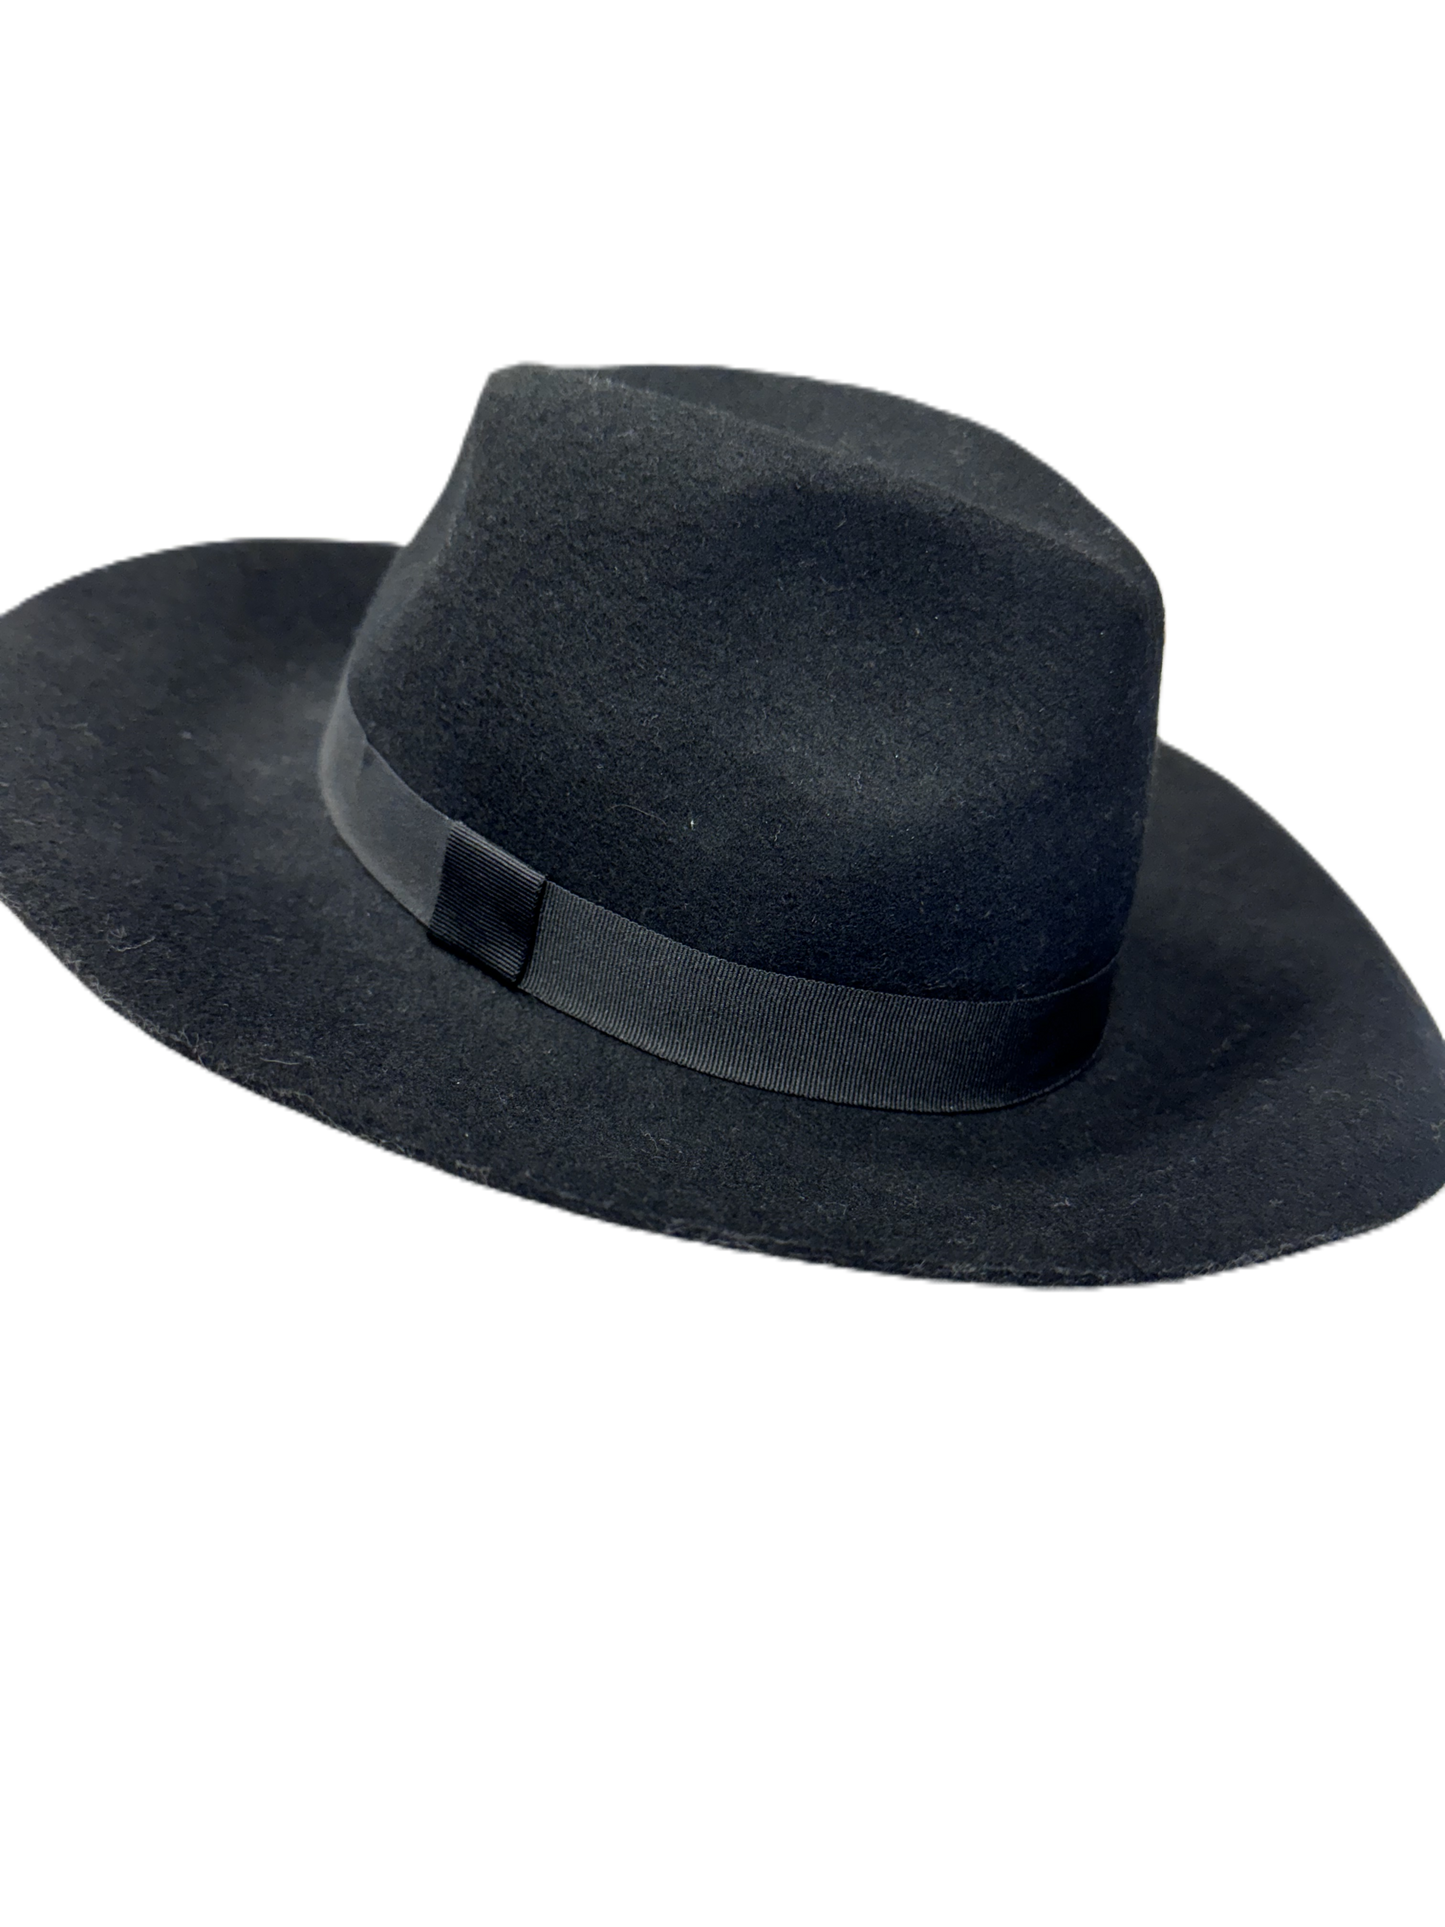 Hat Fedora By august hat